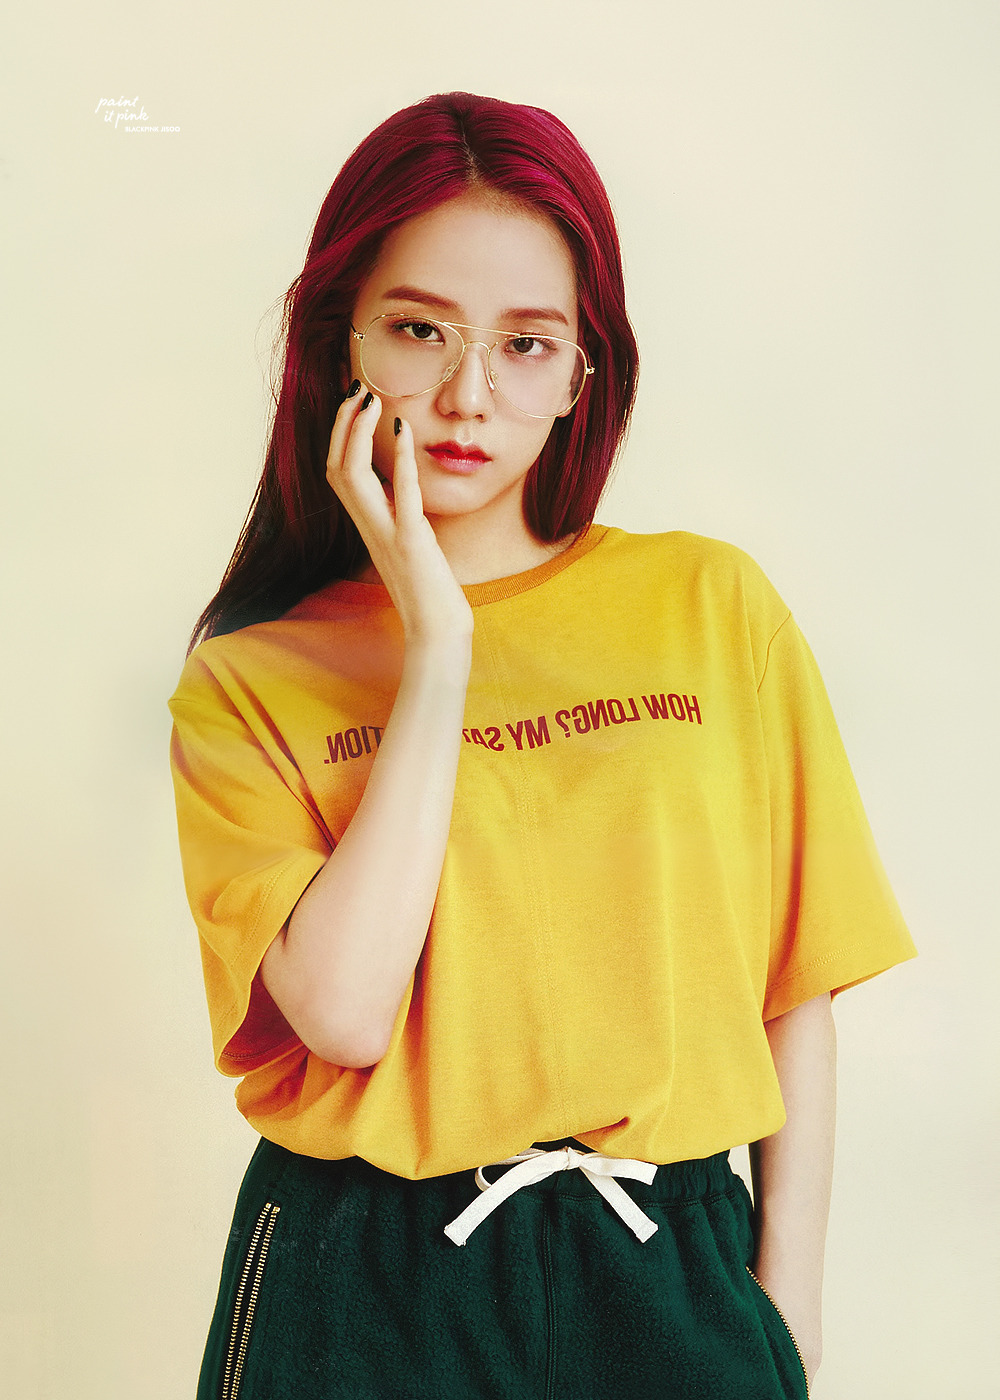 Black Pink images Jisoo HD wallpaper and background photos 40710603